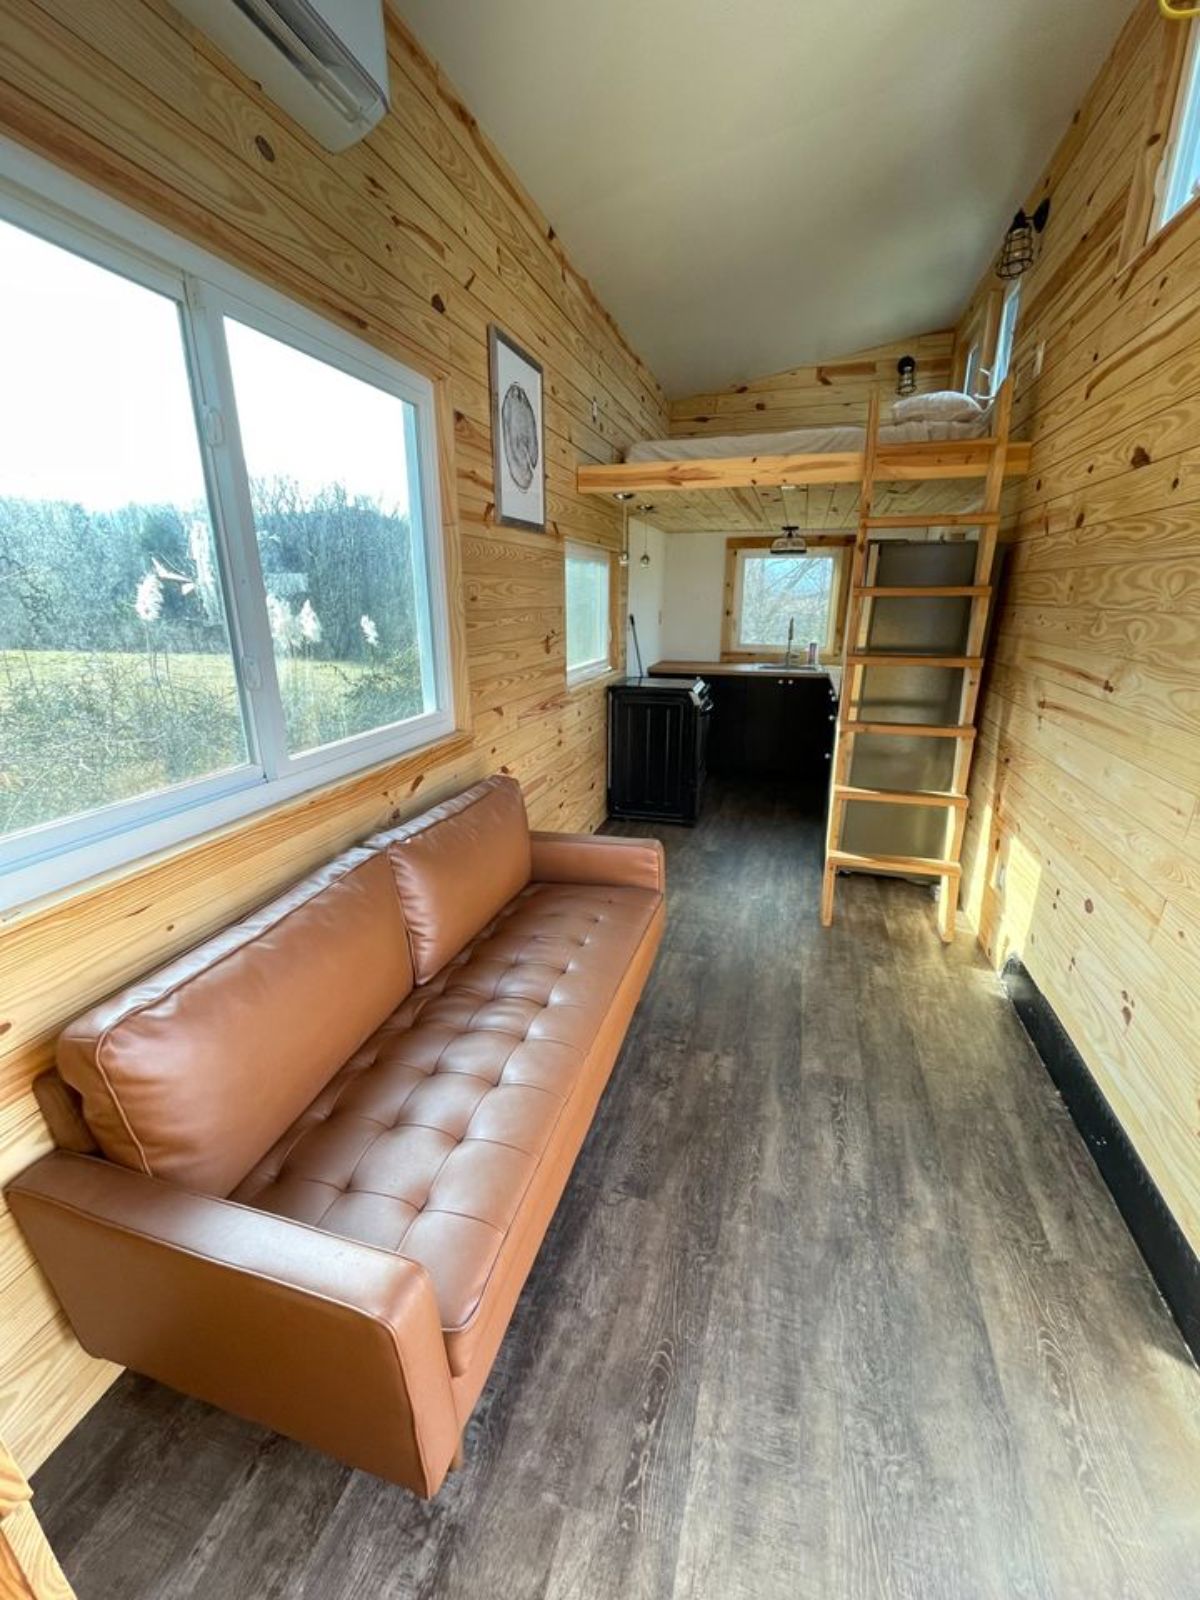 Living area of 24’ Tiny House on Wheels has a couch